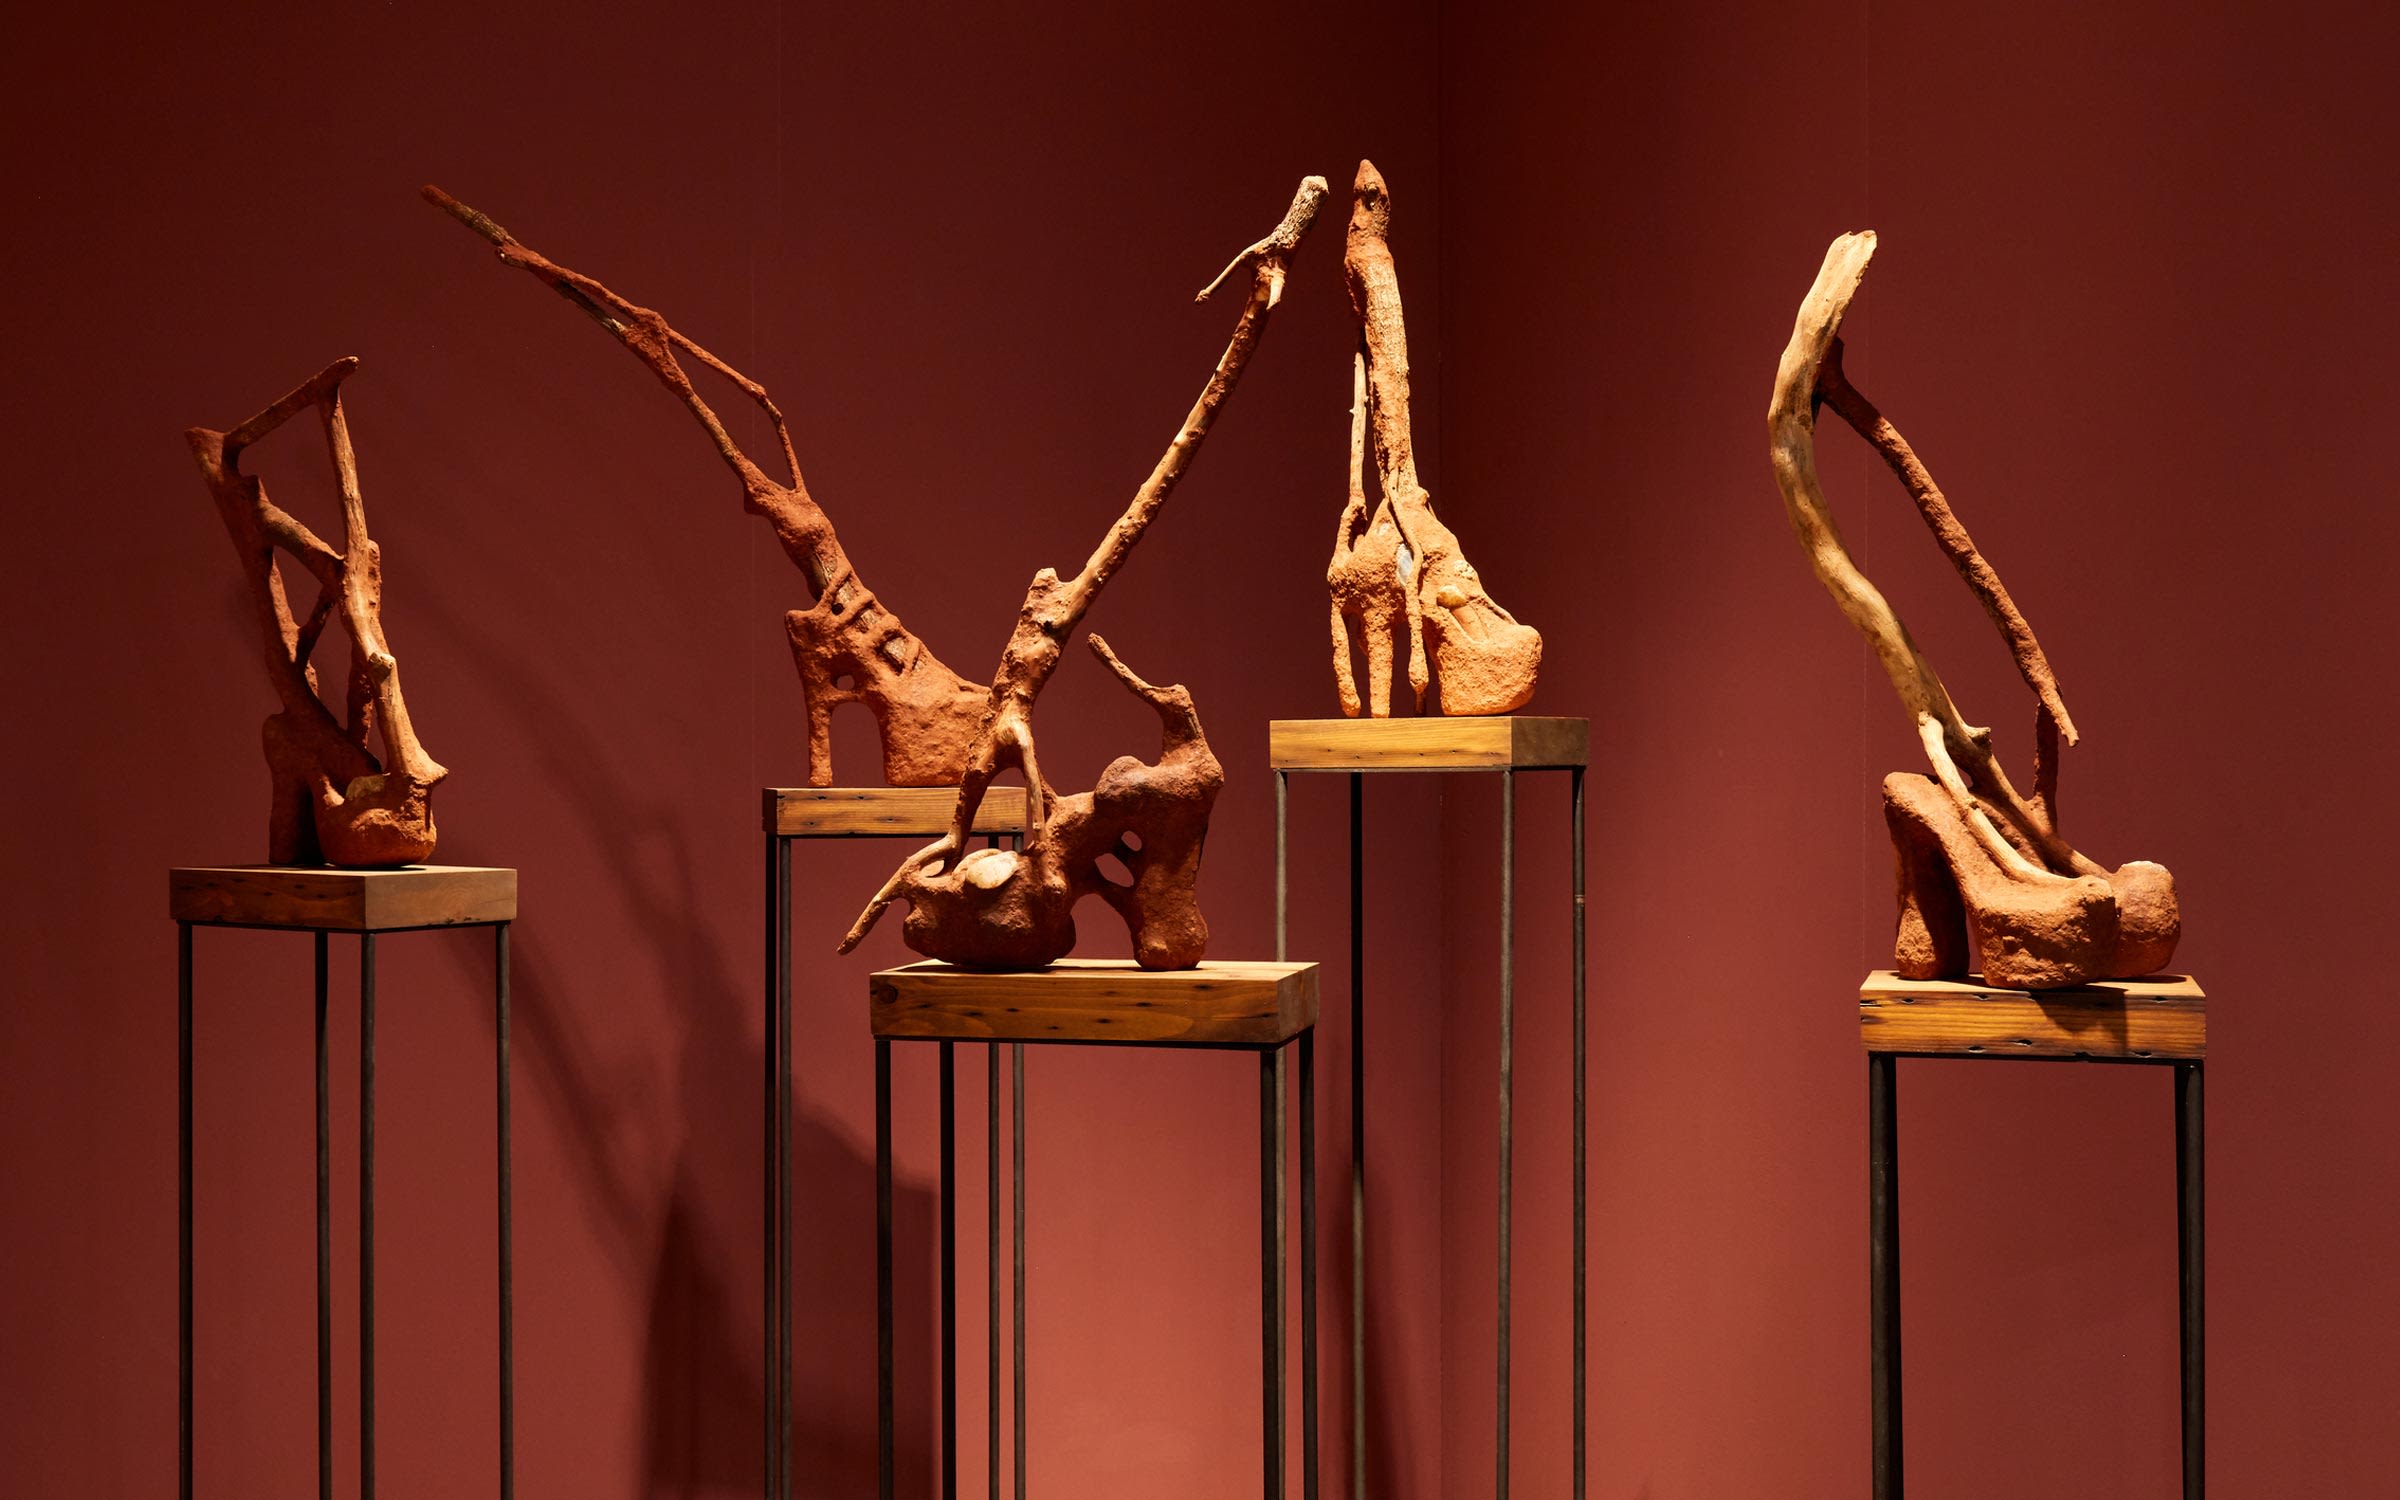 An array of sculptures by Wangechi Mutu, presented by Gladstone Gallery in the Kabinett sector (E7).